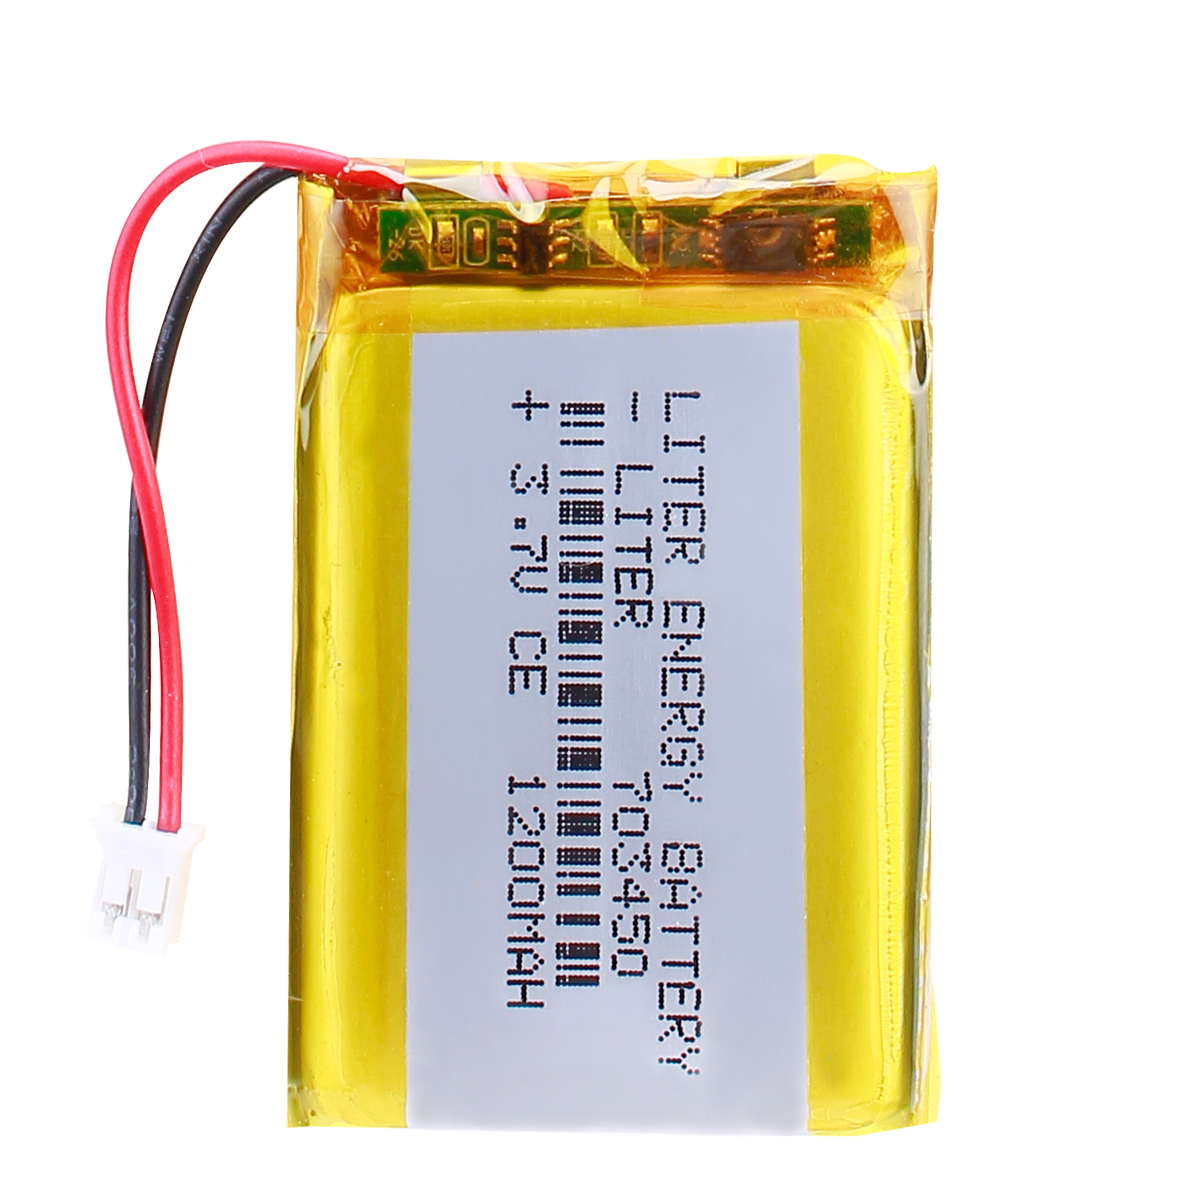 100pcs Lithium Polymer Battery liter 703450 3.7V 1200mAh With PCM & Wires